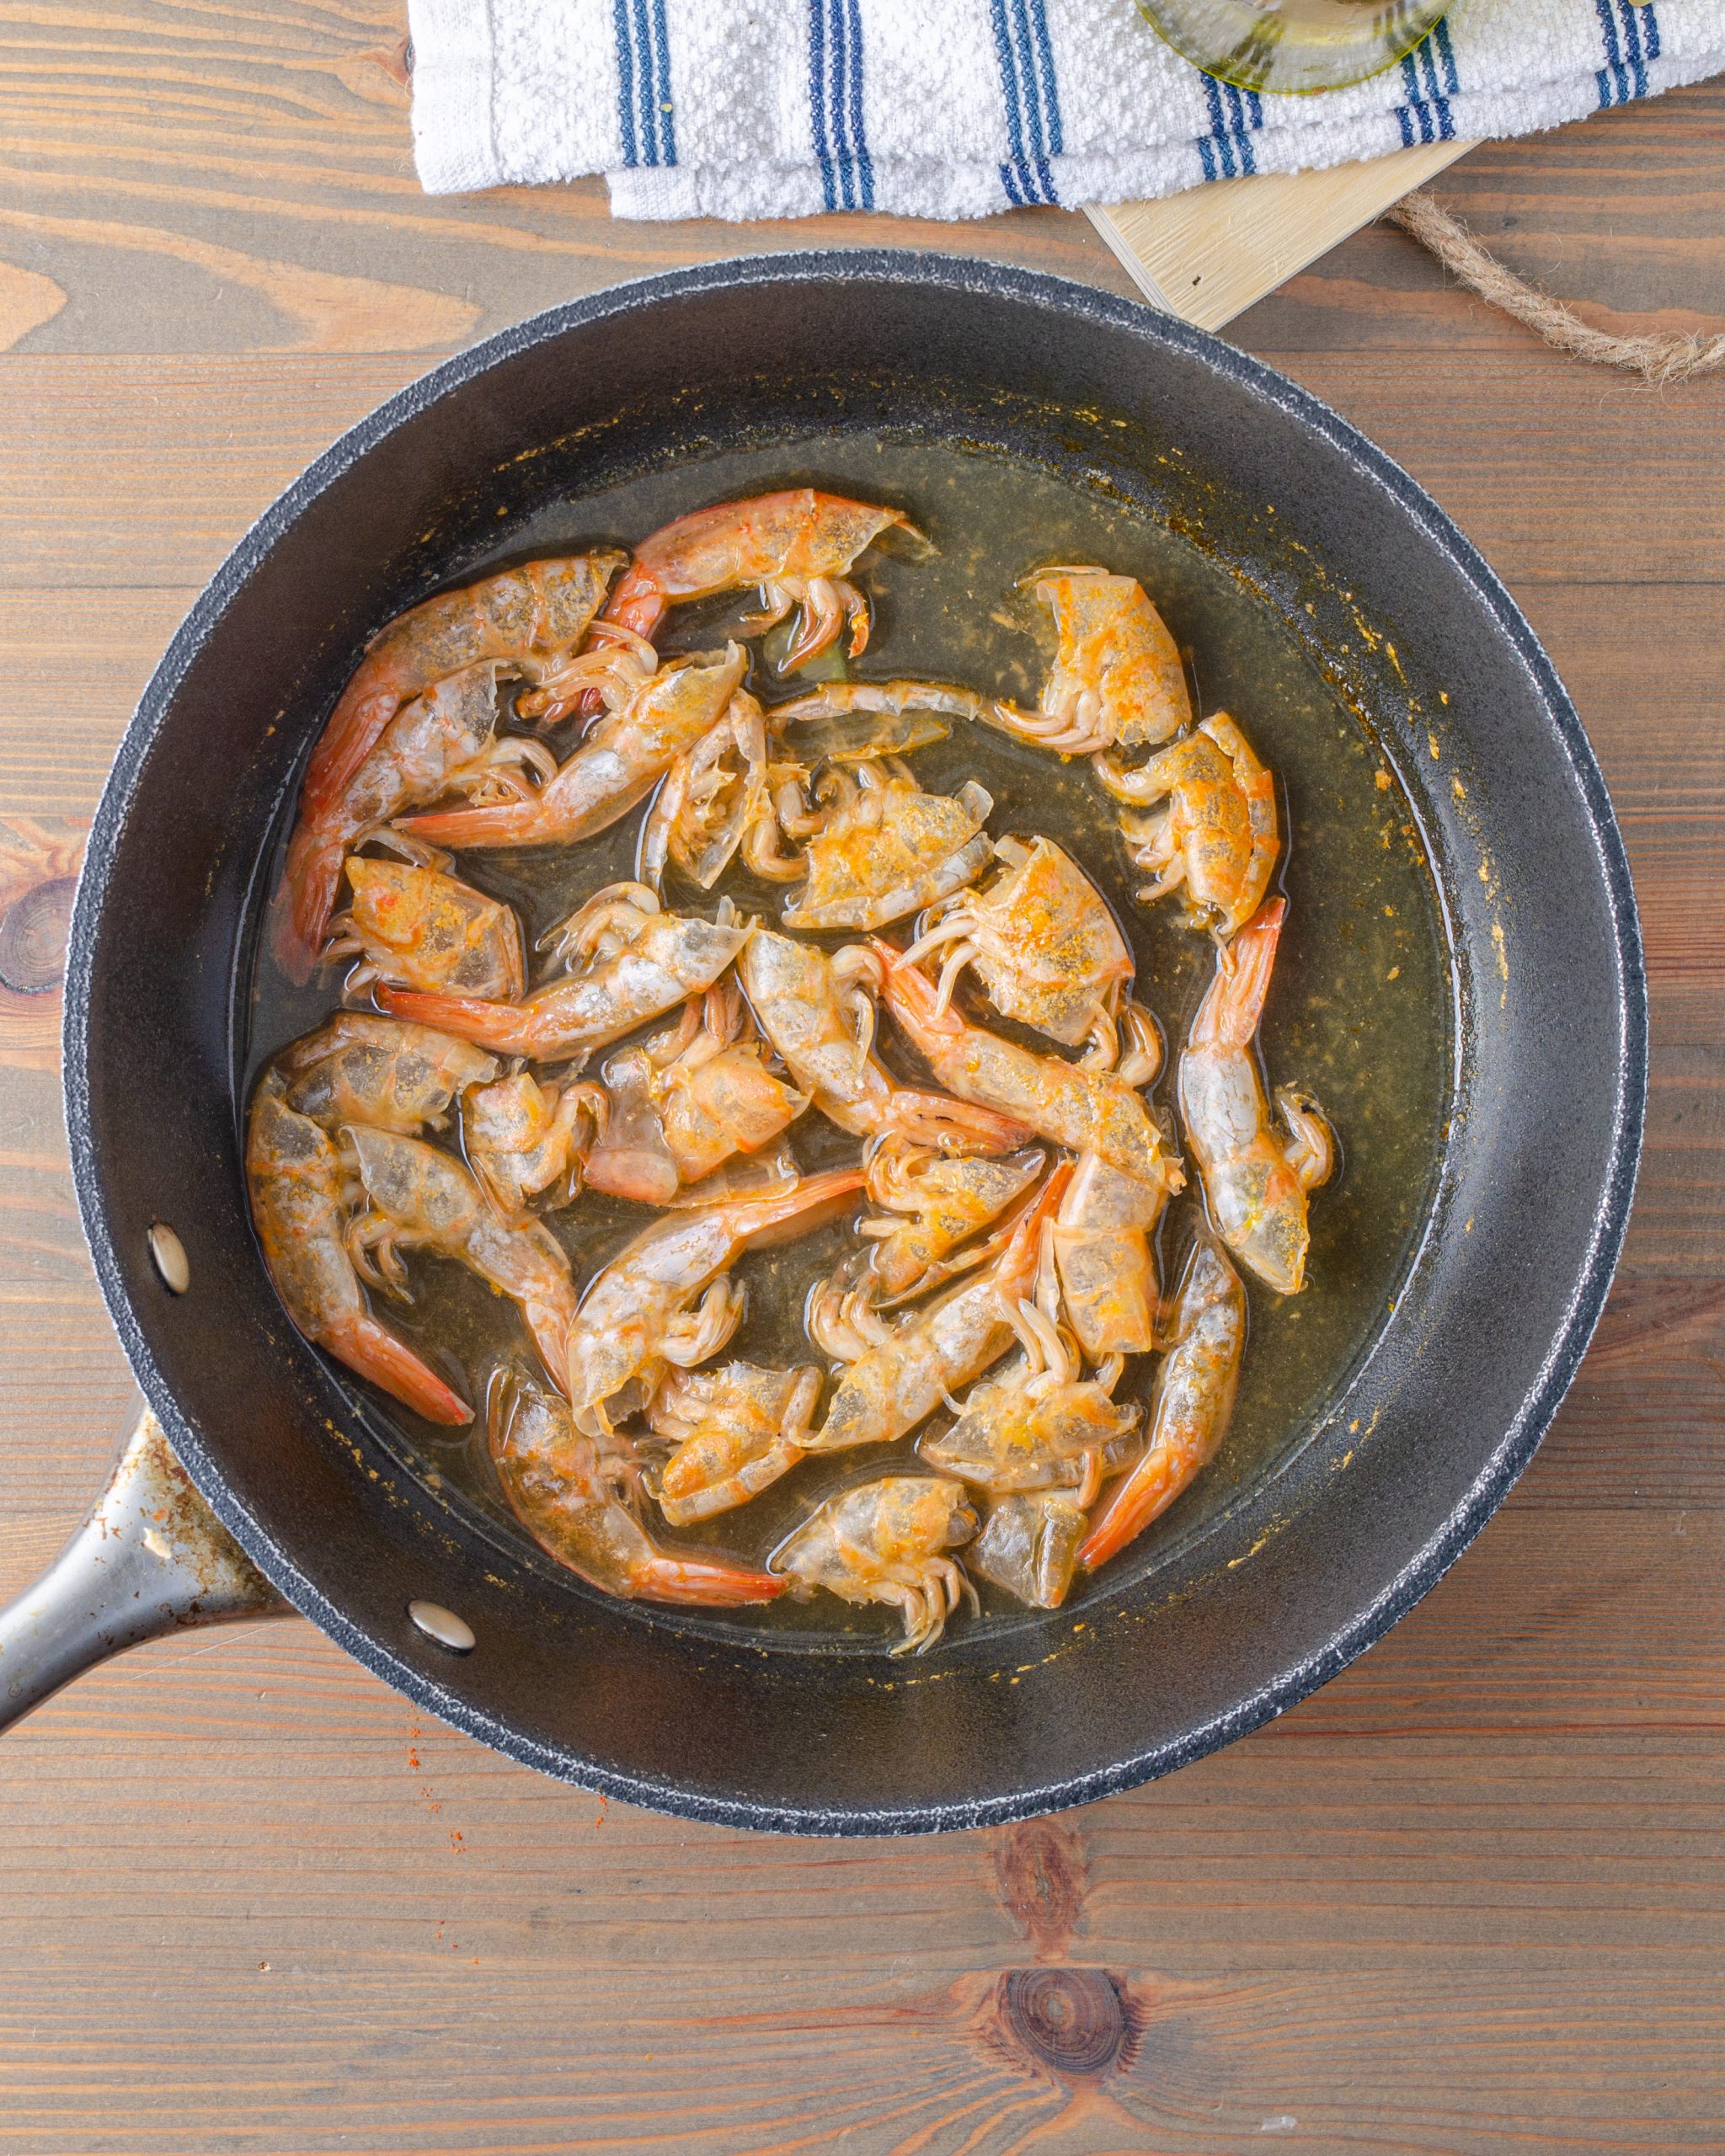 Place the shells from the shrimp into a pot of boiling water. Simmer the shells for 20 minutes, then remove them from the pot. 